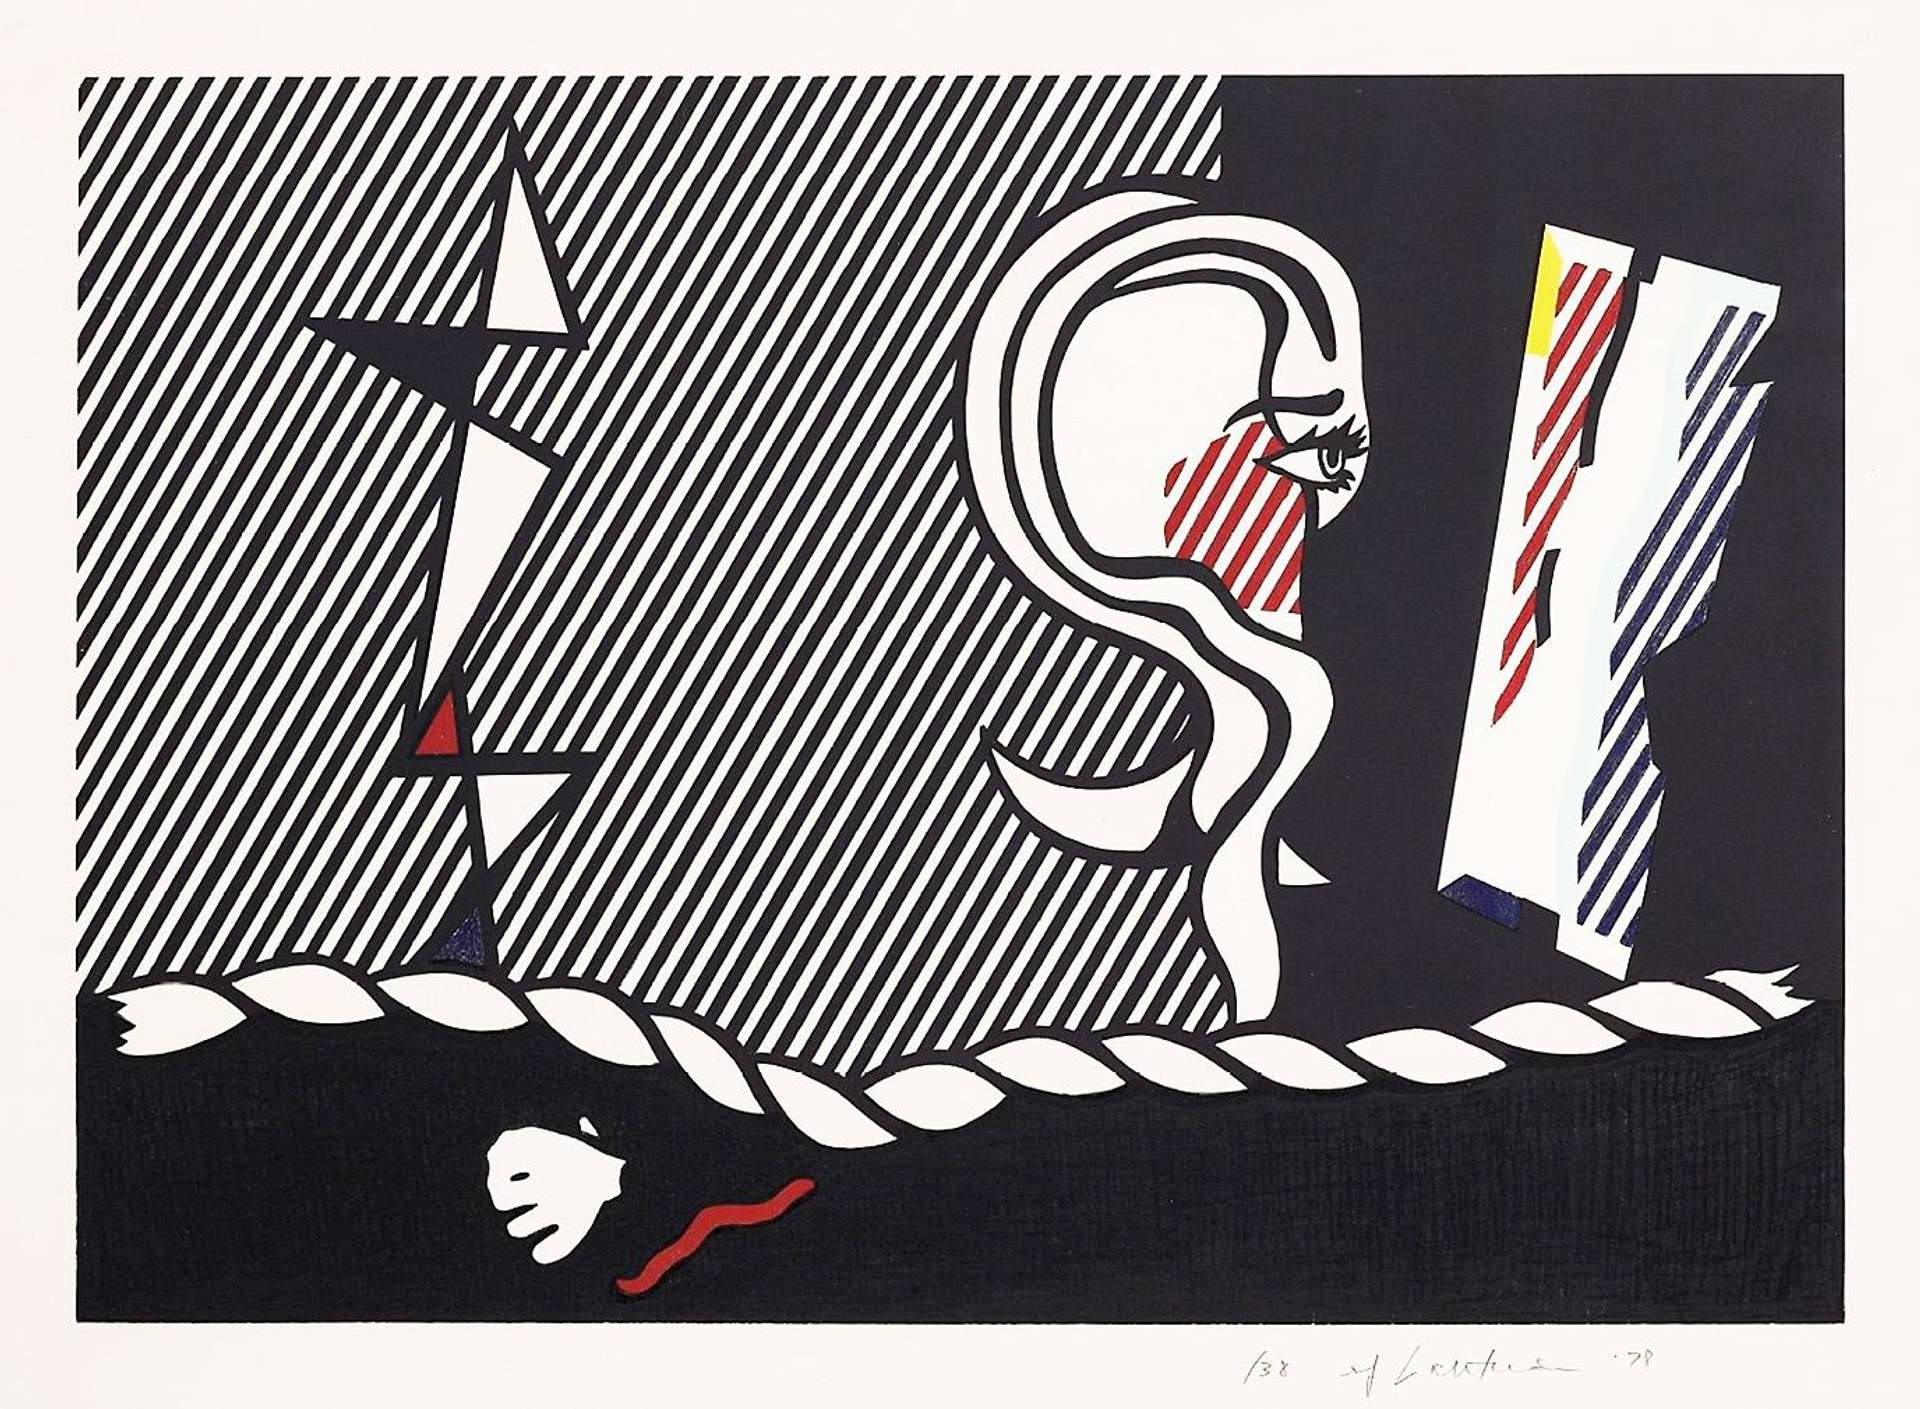 Various figures lined up on a hovering rope set against a black backdrop. Leading the succession of shapes is a shattered mirror located at the right edge of the print. An amorphous figure with long-lashed eyes lingers in front of it. The final one is a queued-up shape, composed of protruding triangles.